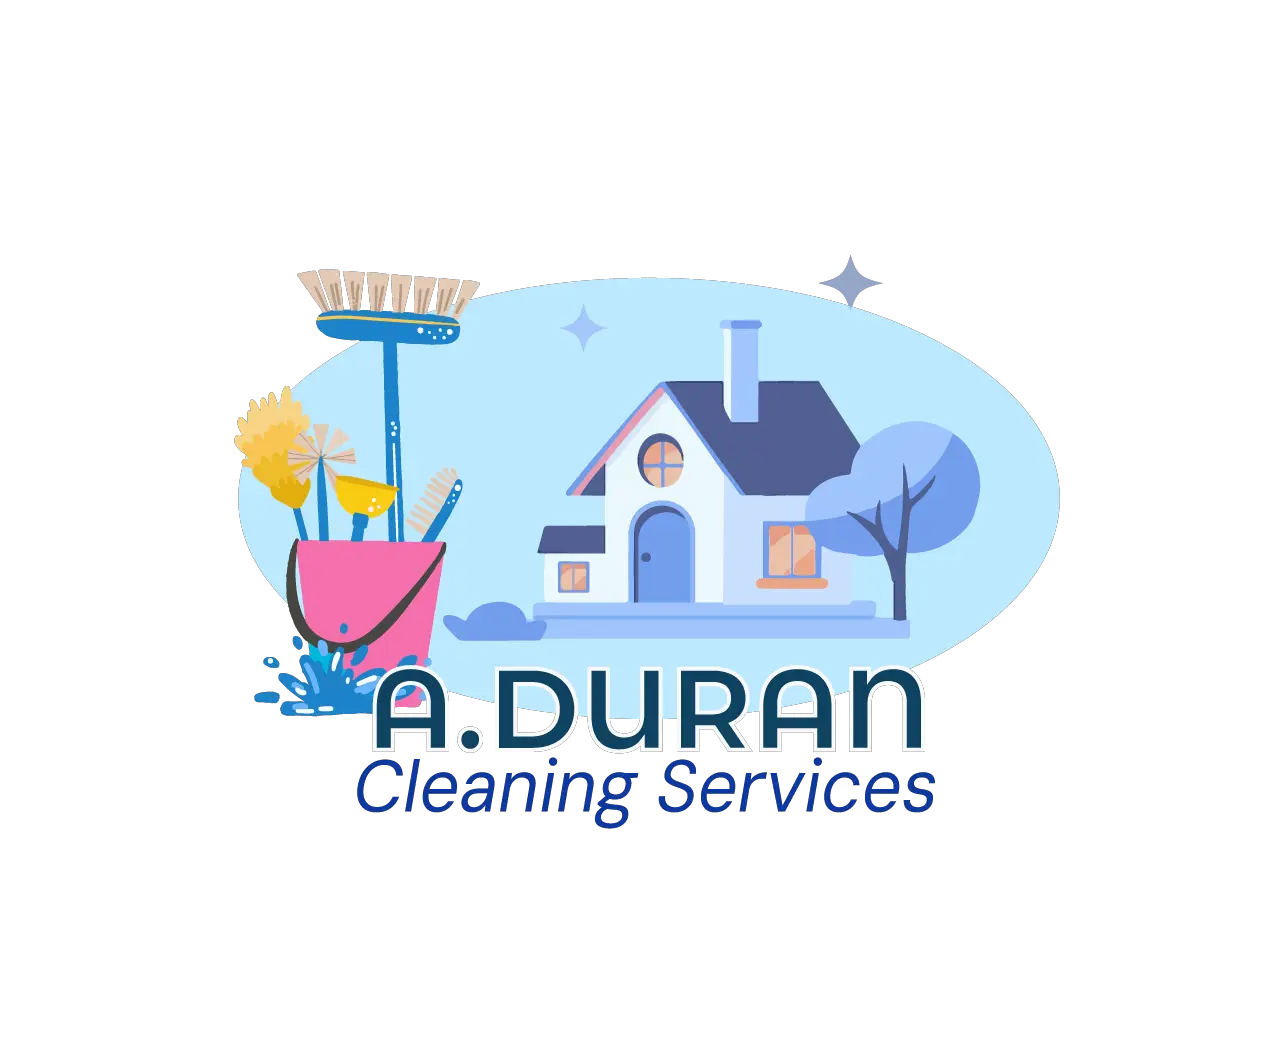 A. Duran Cleaning Services offers services of Residential Cleaning, House Cleaning, Deep Cleaning, Move Out/In Cleaning, Airbnb Cleaning, Construction Cleaning, Office Cleaning in San Clemente CA, Laguna Niguel CA, Laguna Hills CA, San Juan Capistrano CA, Danopol CA - Residential Cleaning